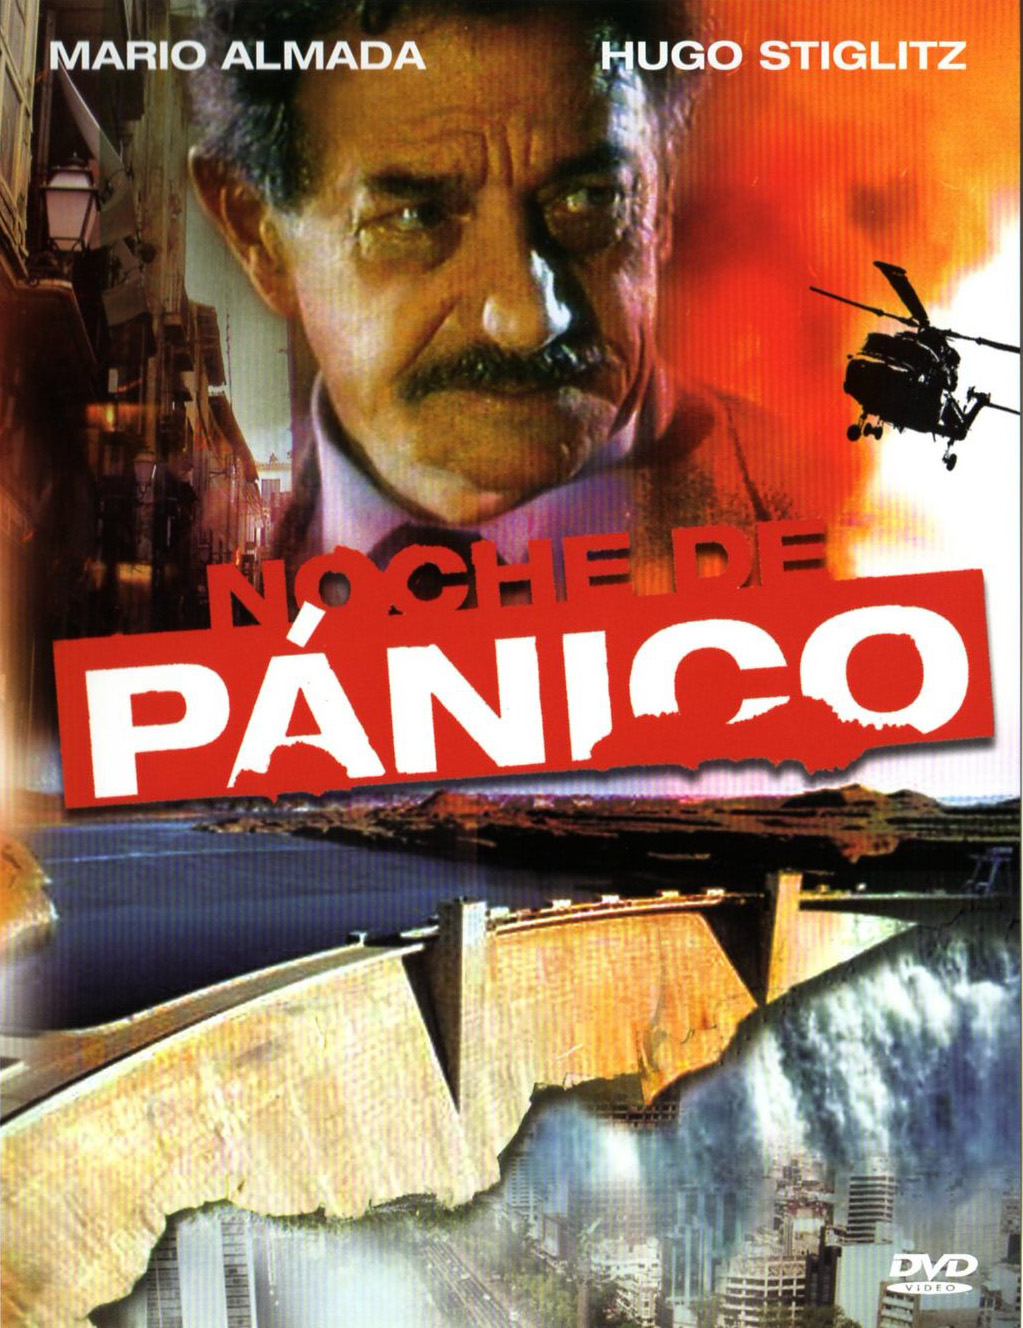 Noche de pánico (1990) with English Subtitles on DVD on DVD